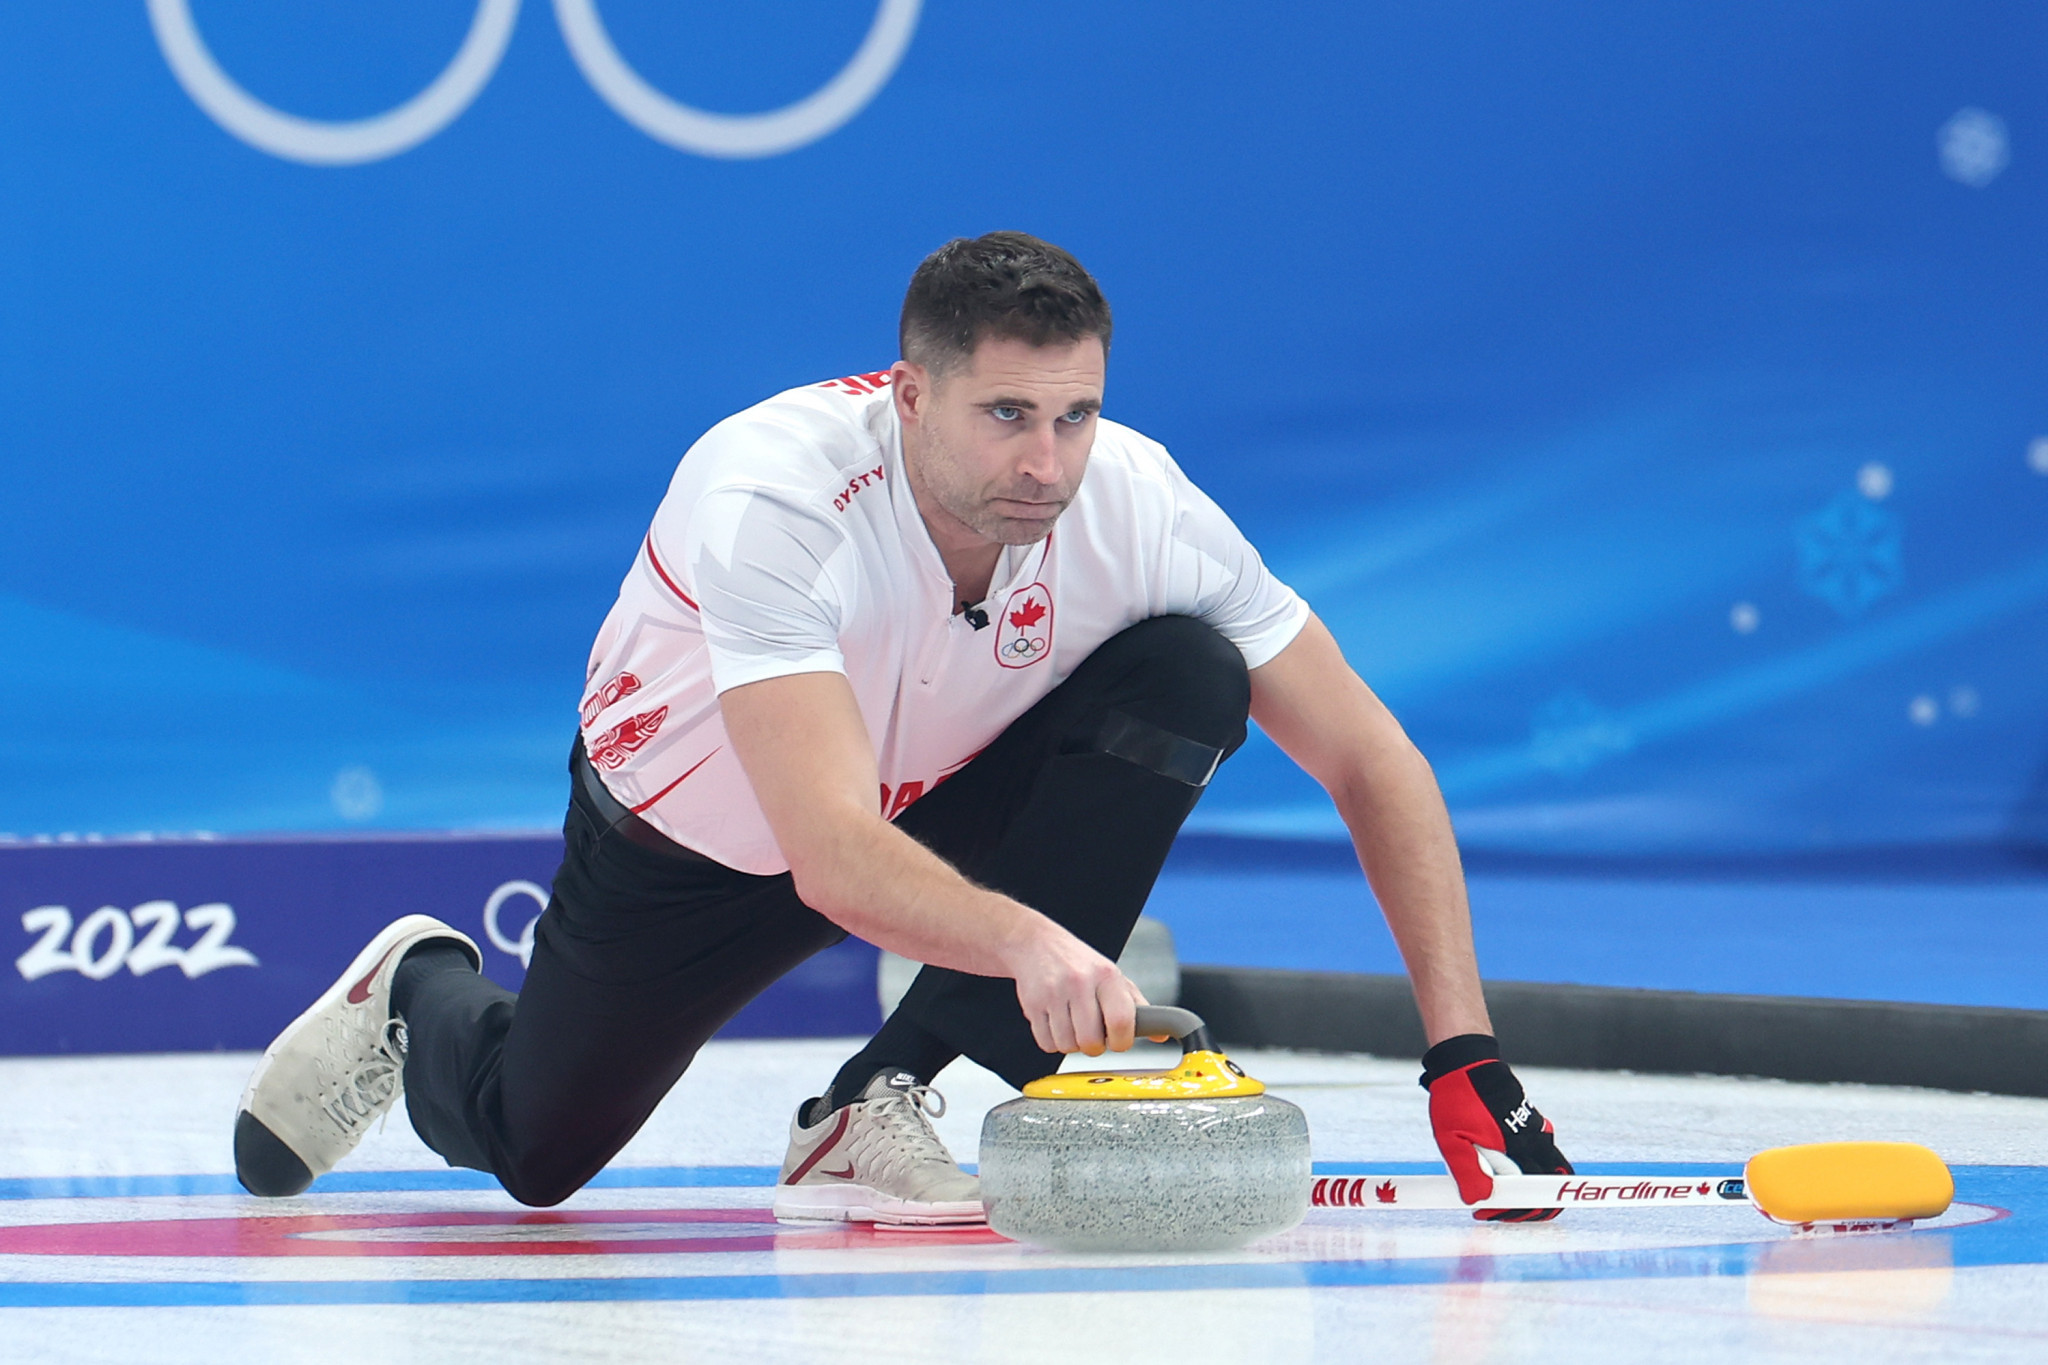 Mixed doubles Olympic curling champion John Morris returned to the ice today ©Getty Images